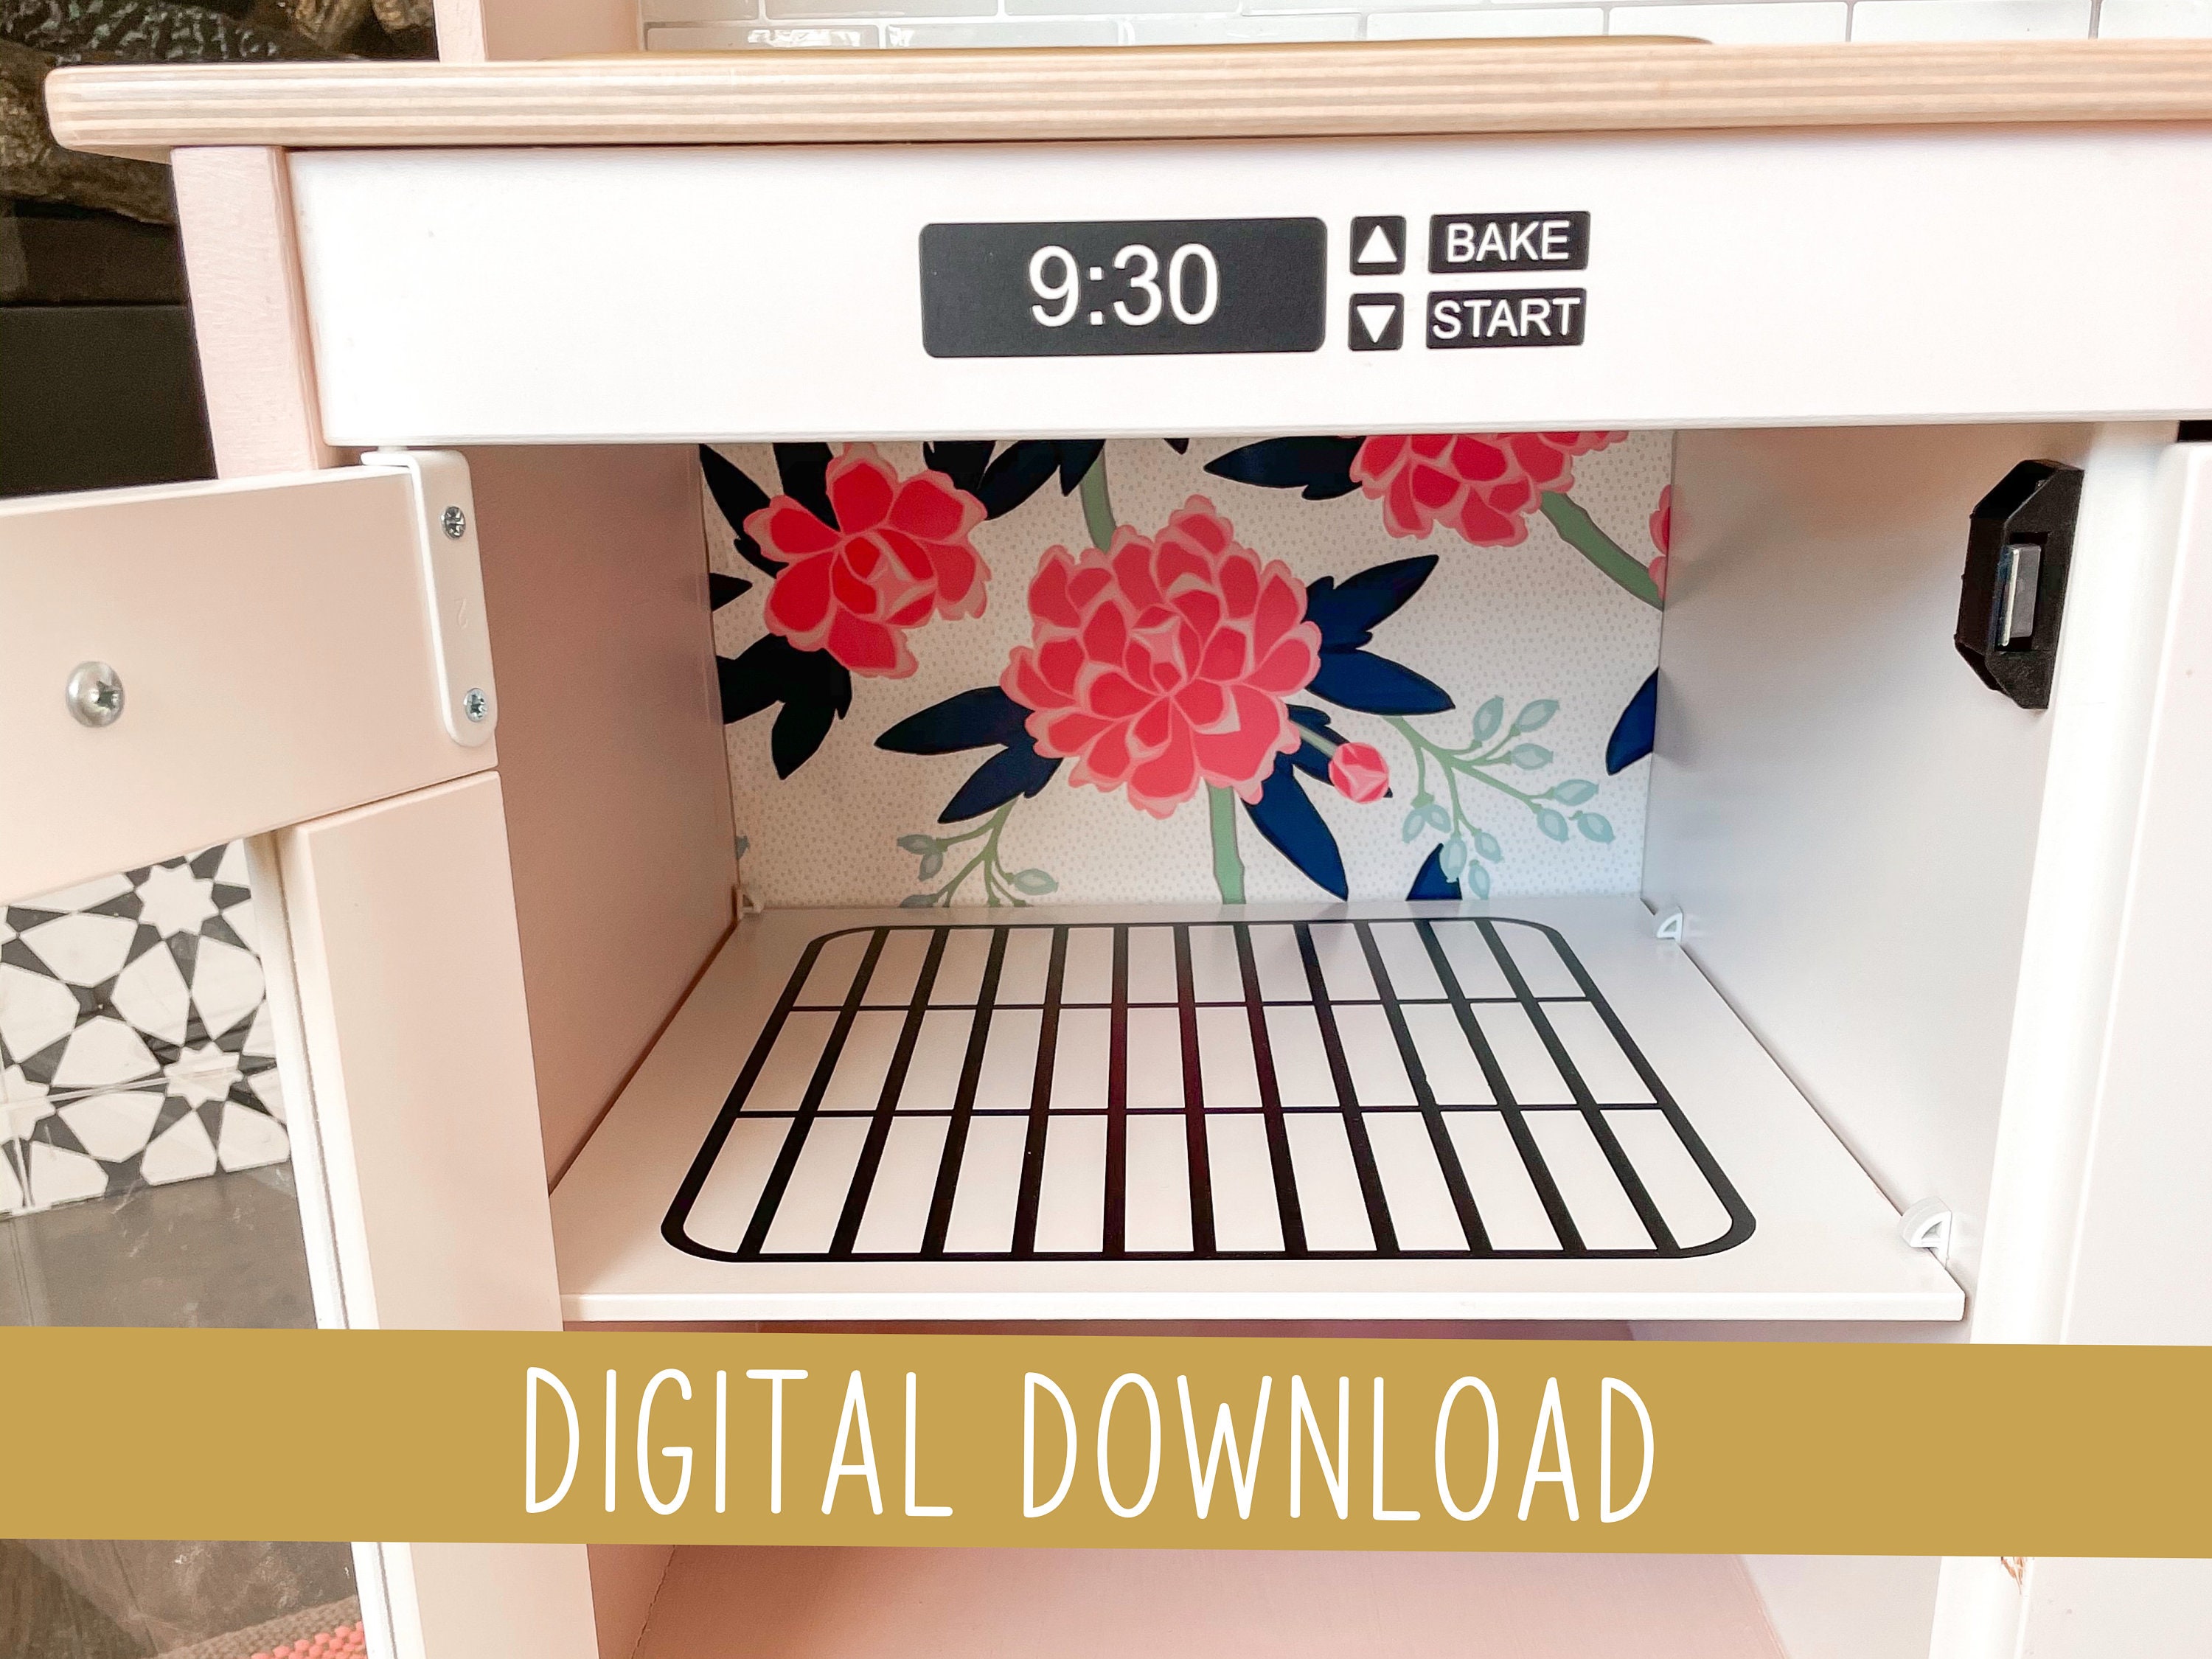 SVG Dollhouse Small Kitchen Microwave / Dollhouse DIY Mini Microwave Oven  Cricut Cut File Instant Download -  Norway